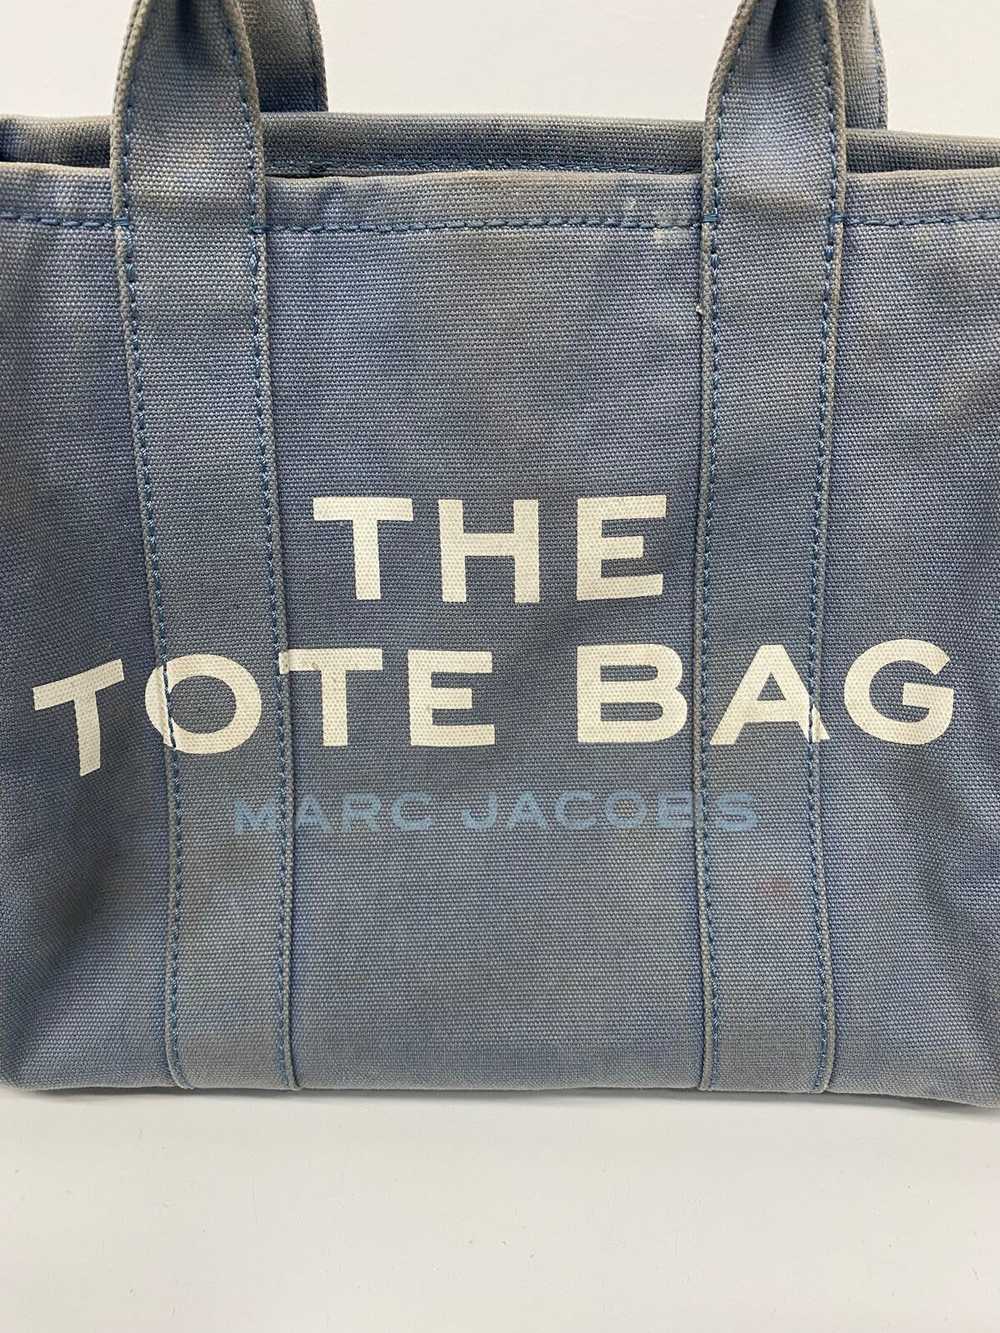 Light Blue The Tote Bag Marc Jacobs - image 2